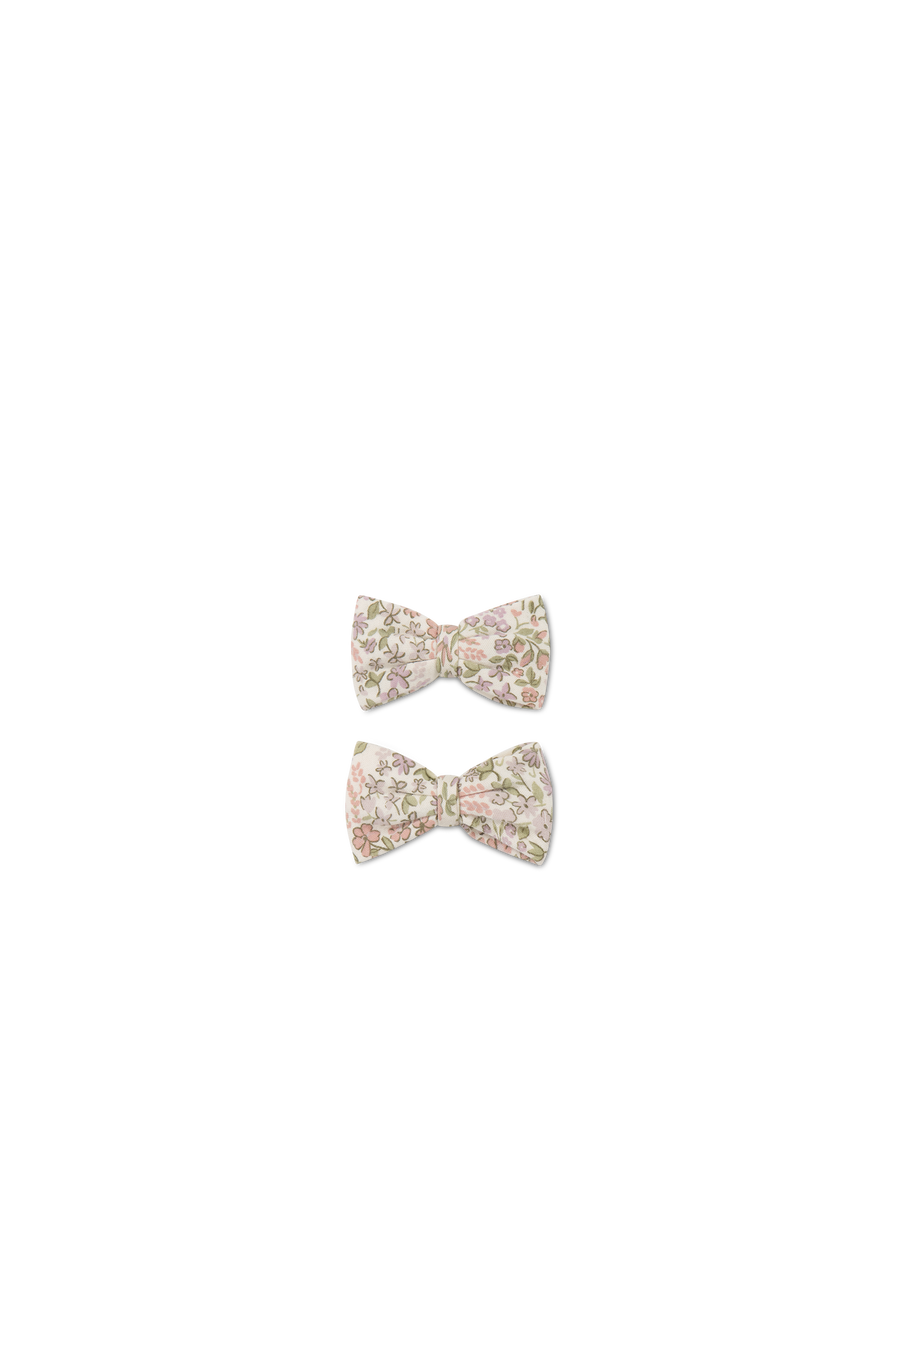 Organic Cotton Bow 2PK - April Eggnog Childrens Bow from Jamie Kay NZ